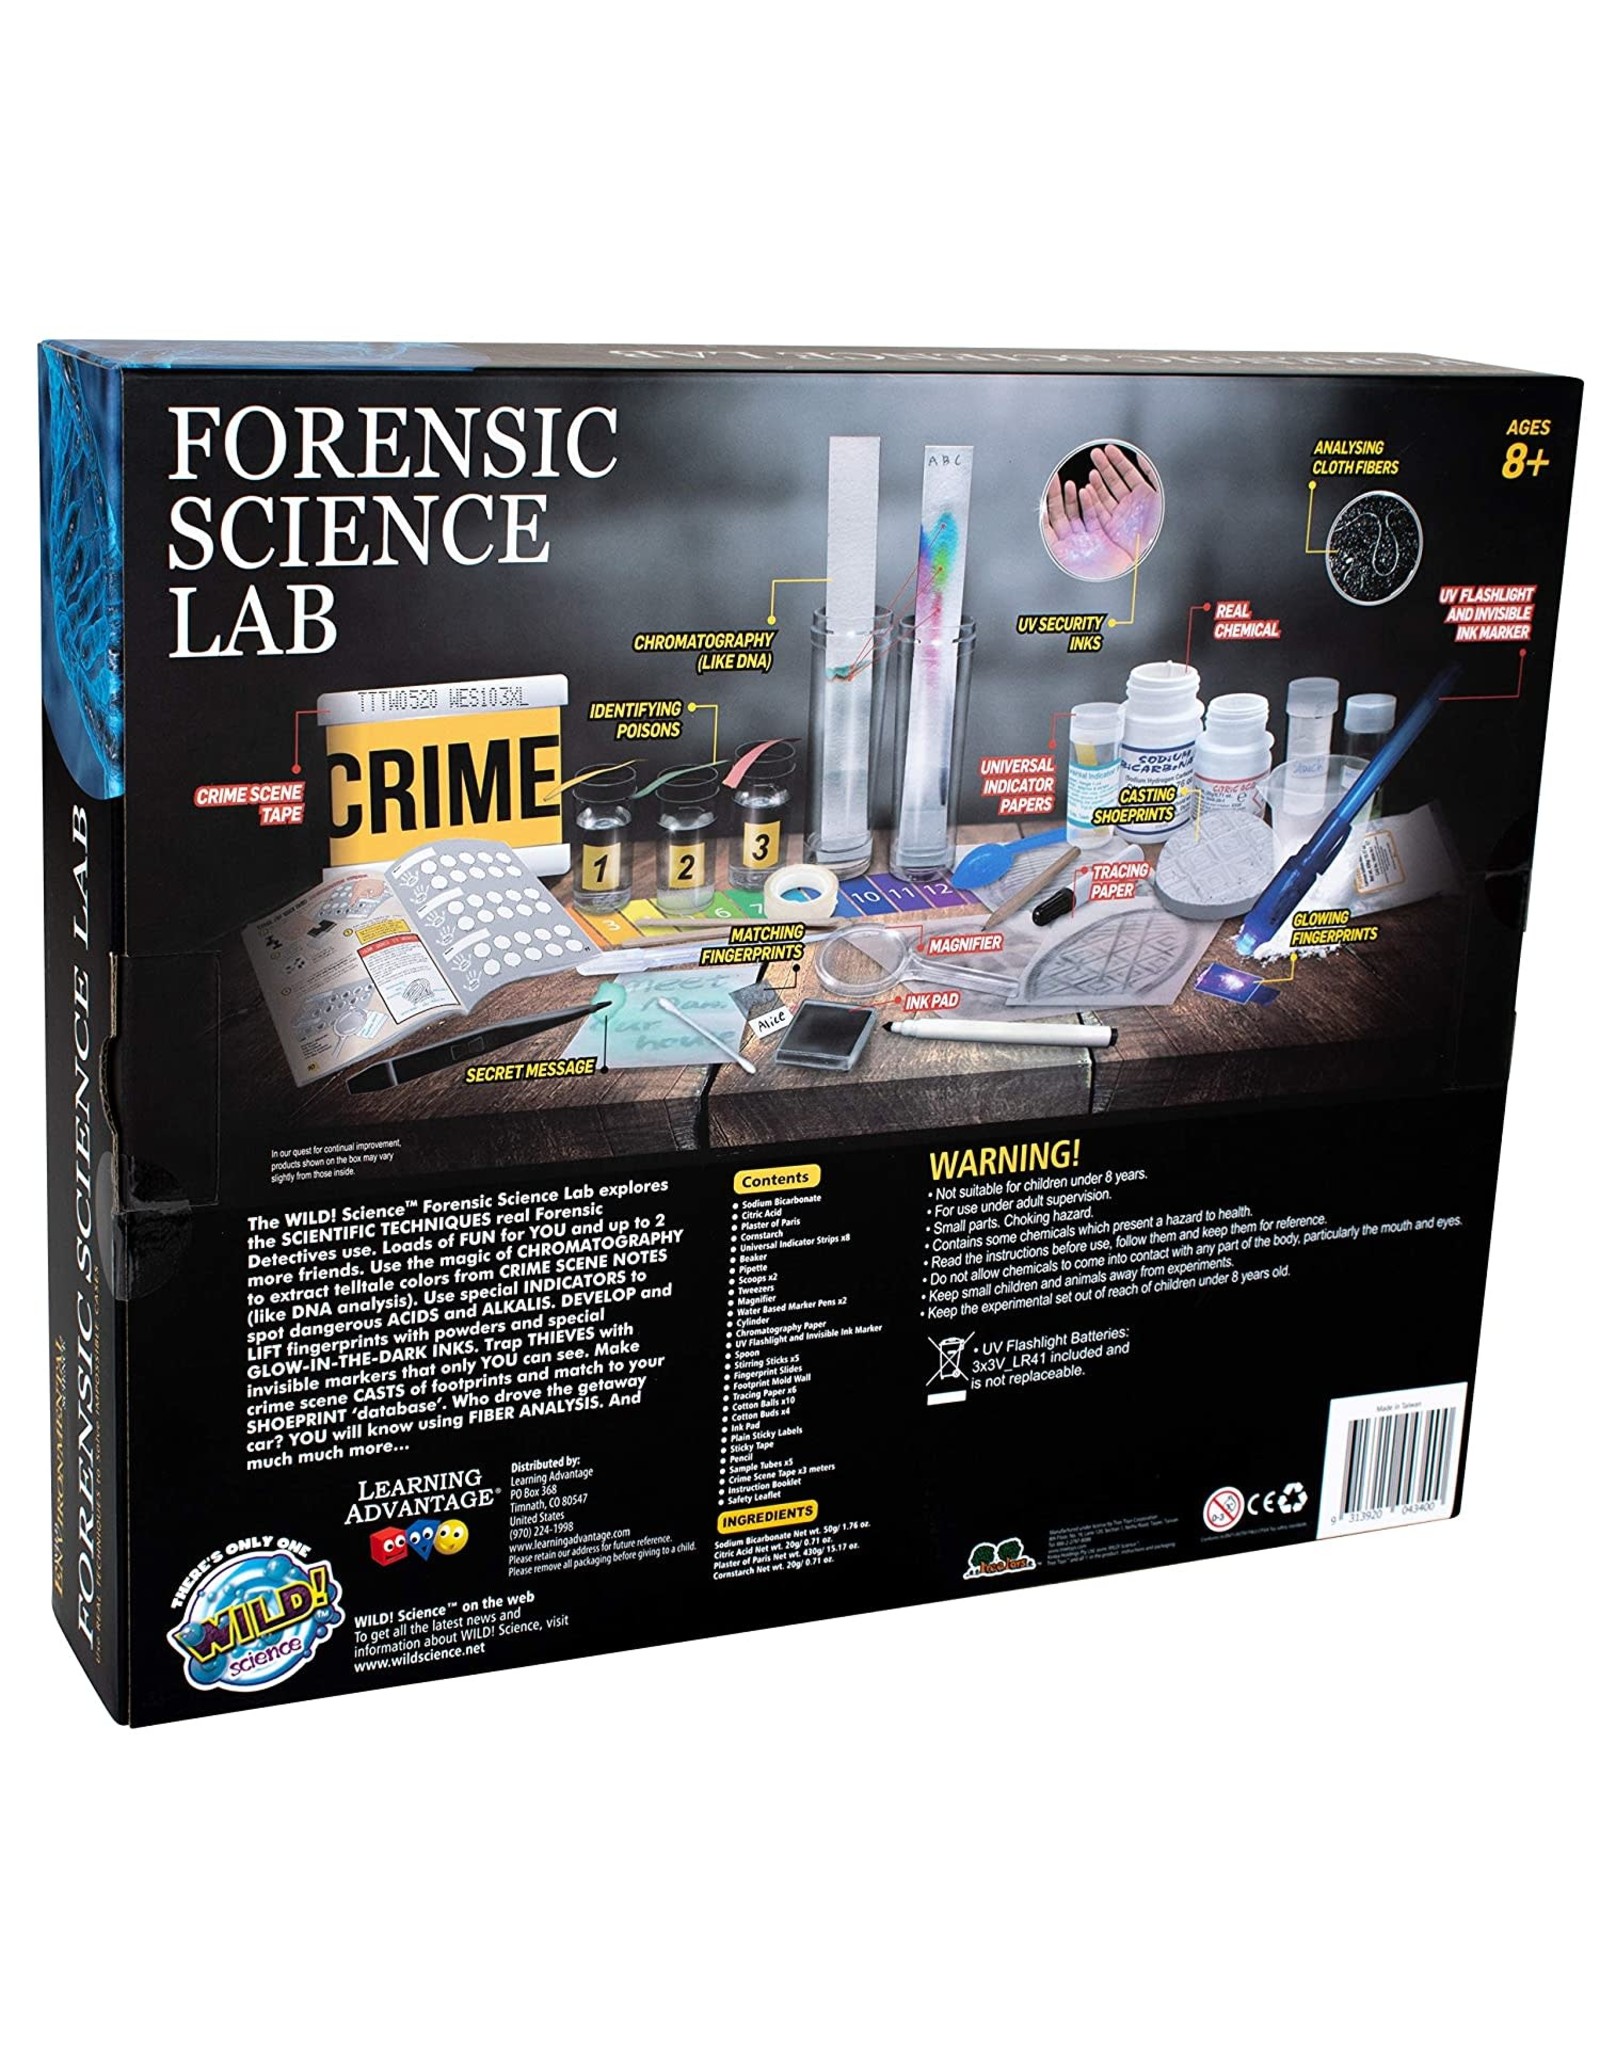 Forensic Science Lab